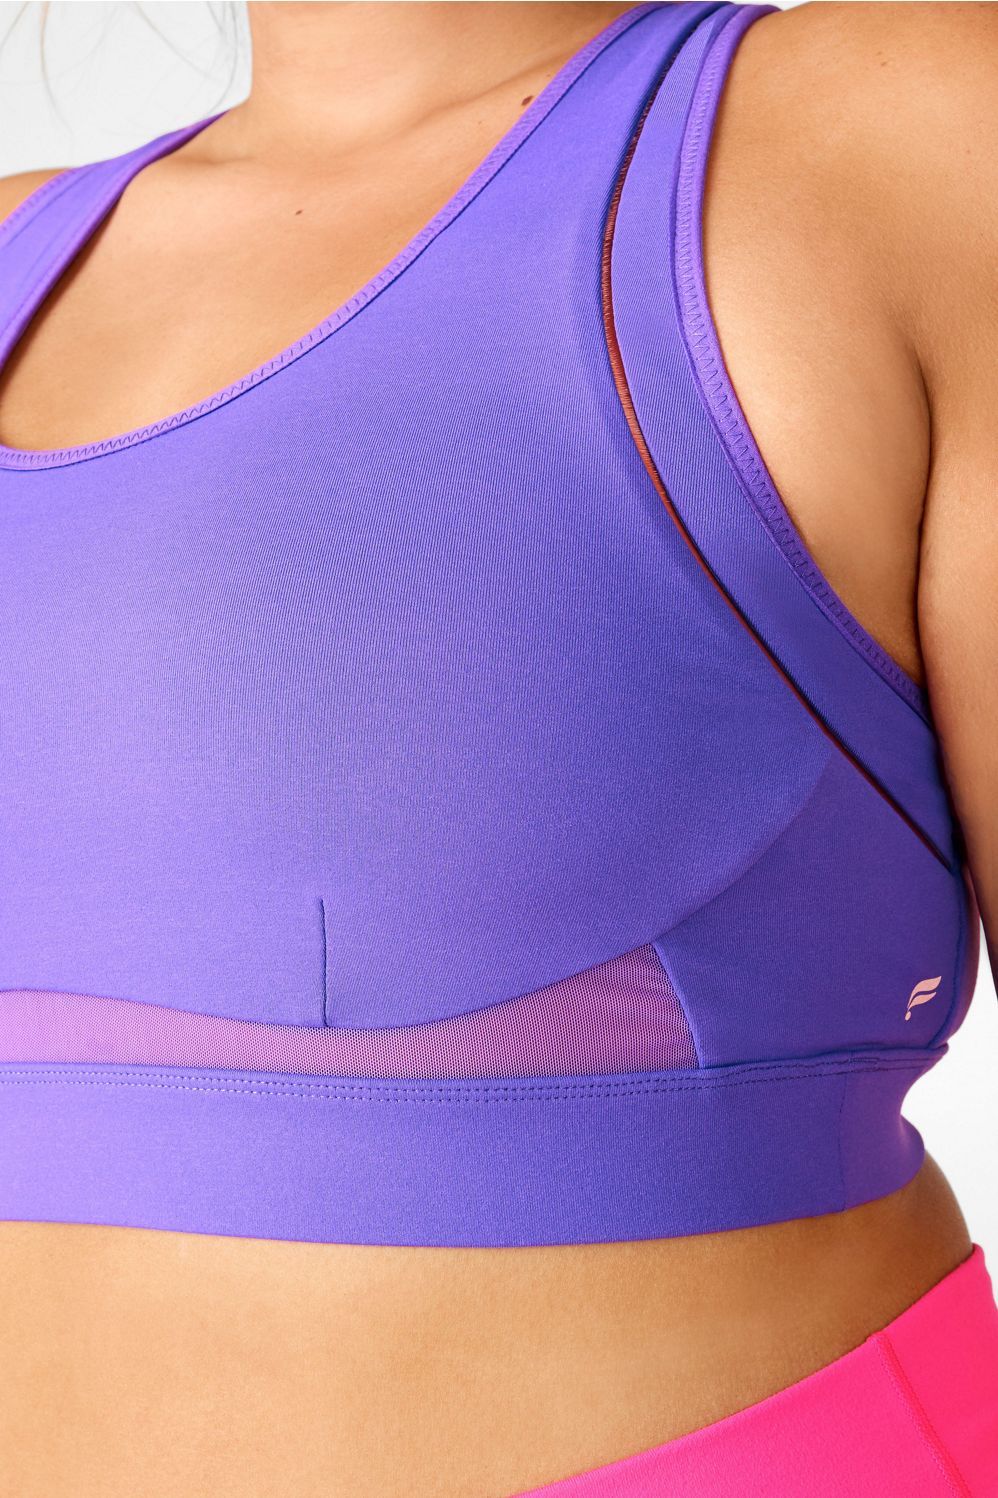 Fabletics Belle High Impact Sports Bra Multiple - $29 (62% Off Retail) -  From Karli